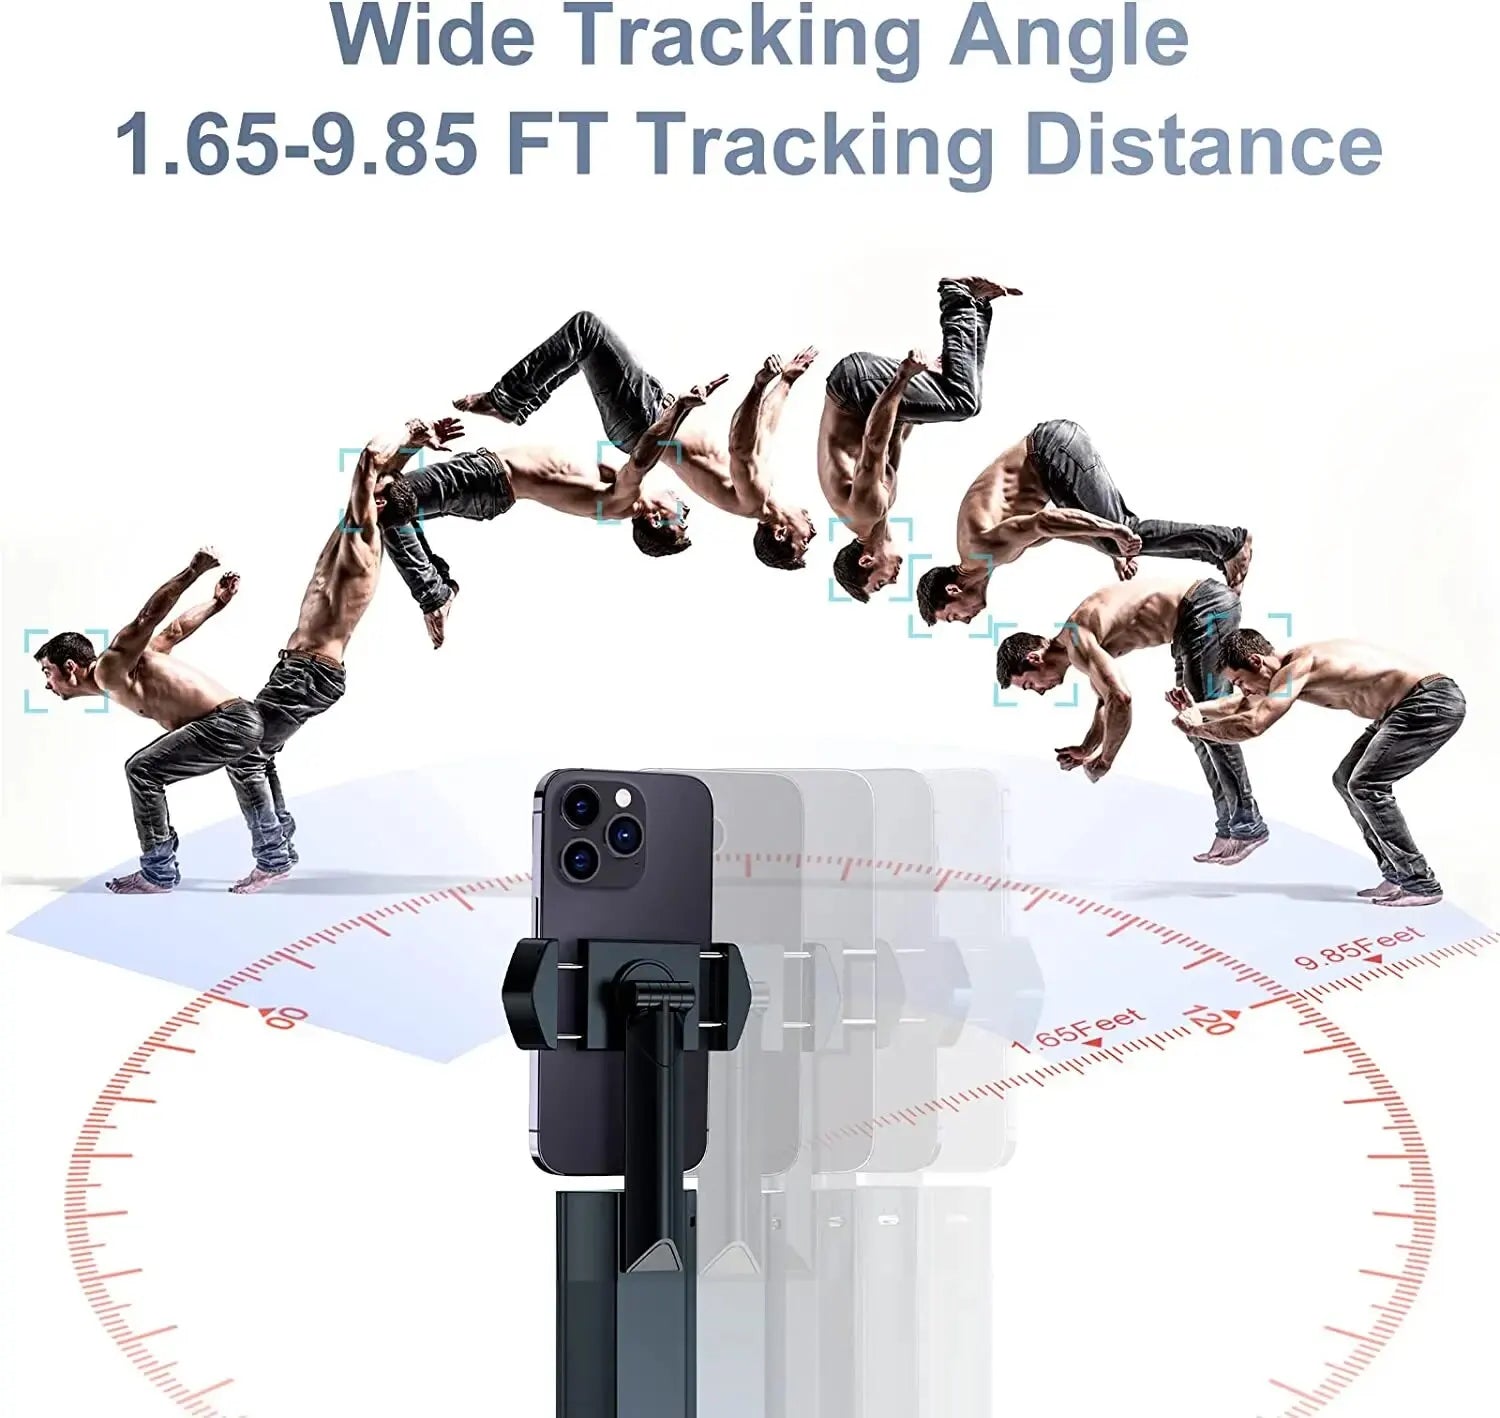 Auto Face Tracking Phone Holder No App Required 360° Rotation Face Body Phone Track Tripod Gesture Control Smart Shooting Mount